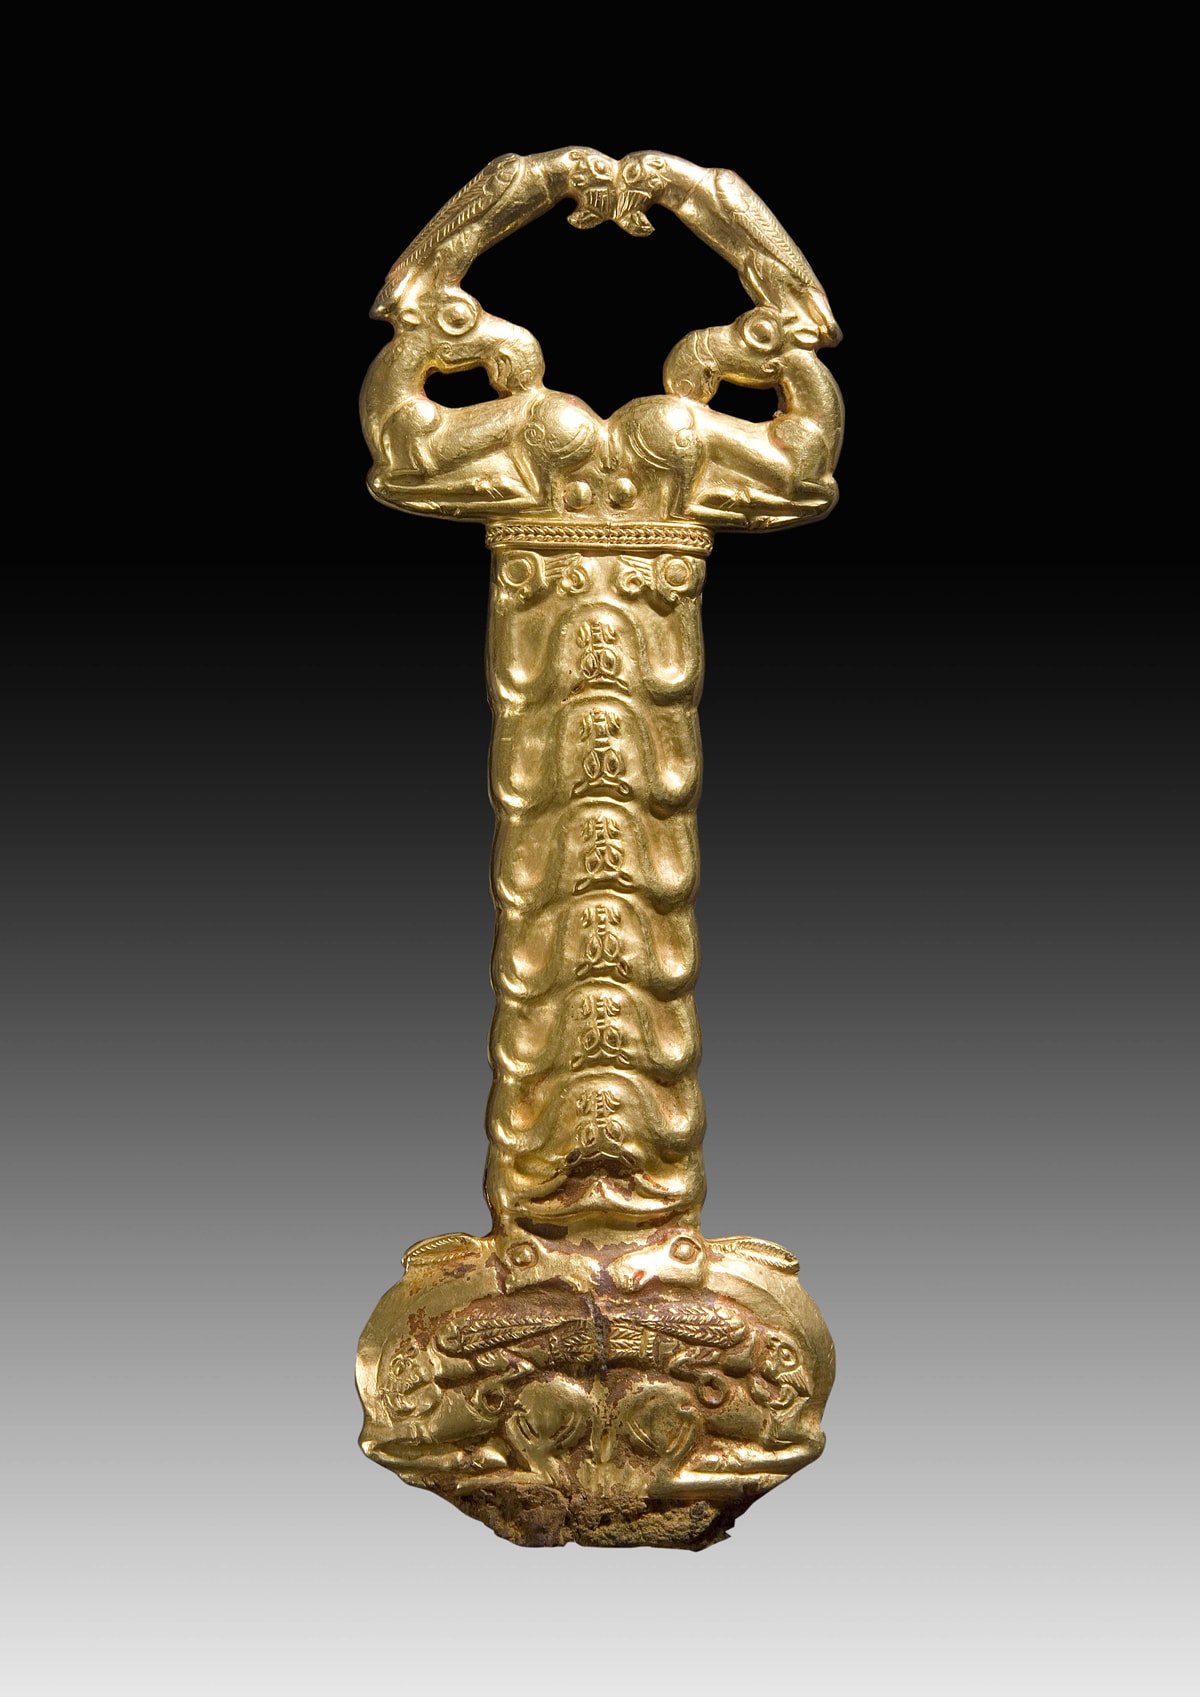 Hilt with a portion of the iron blade